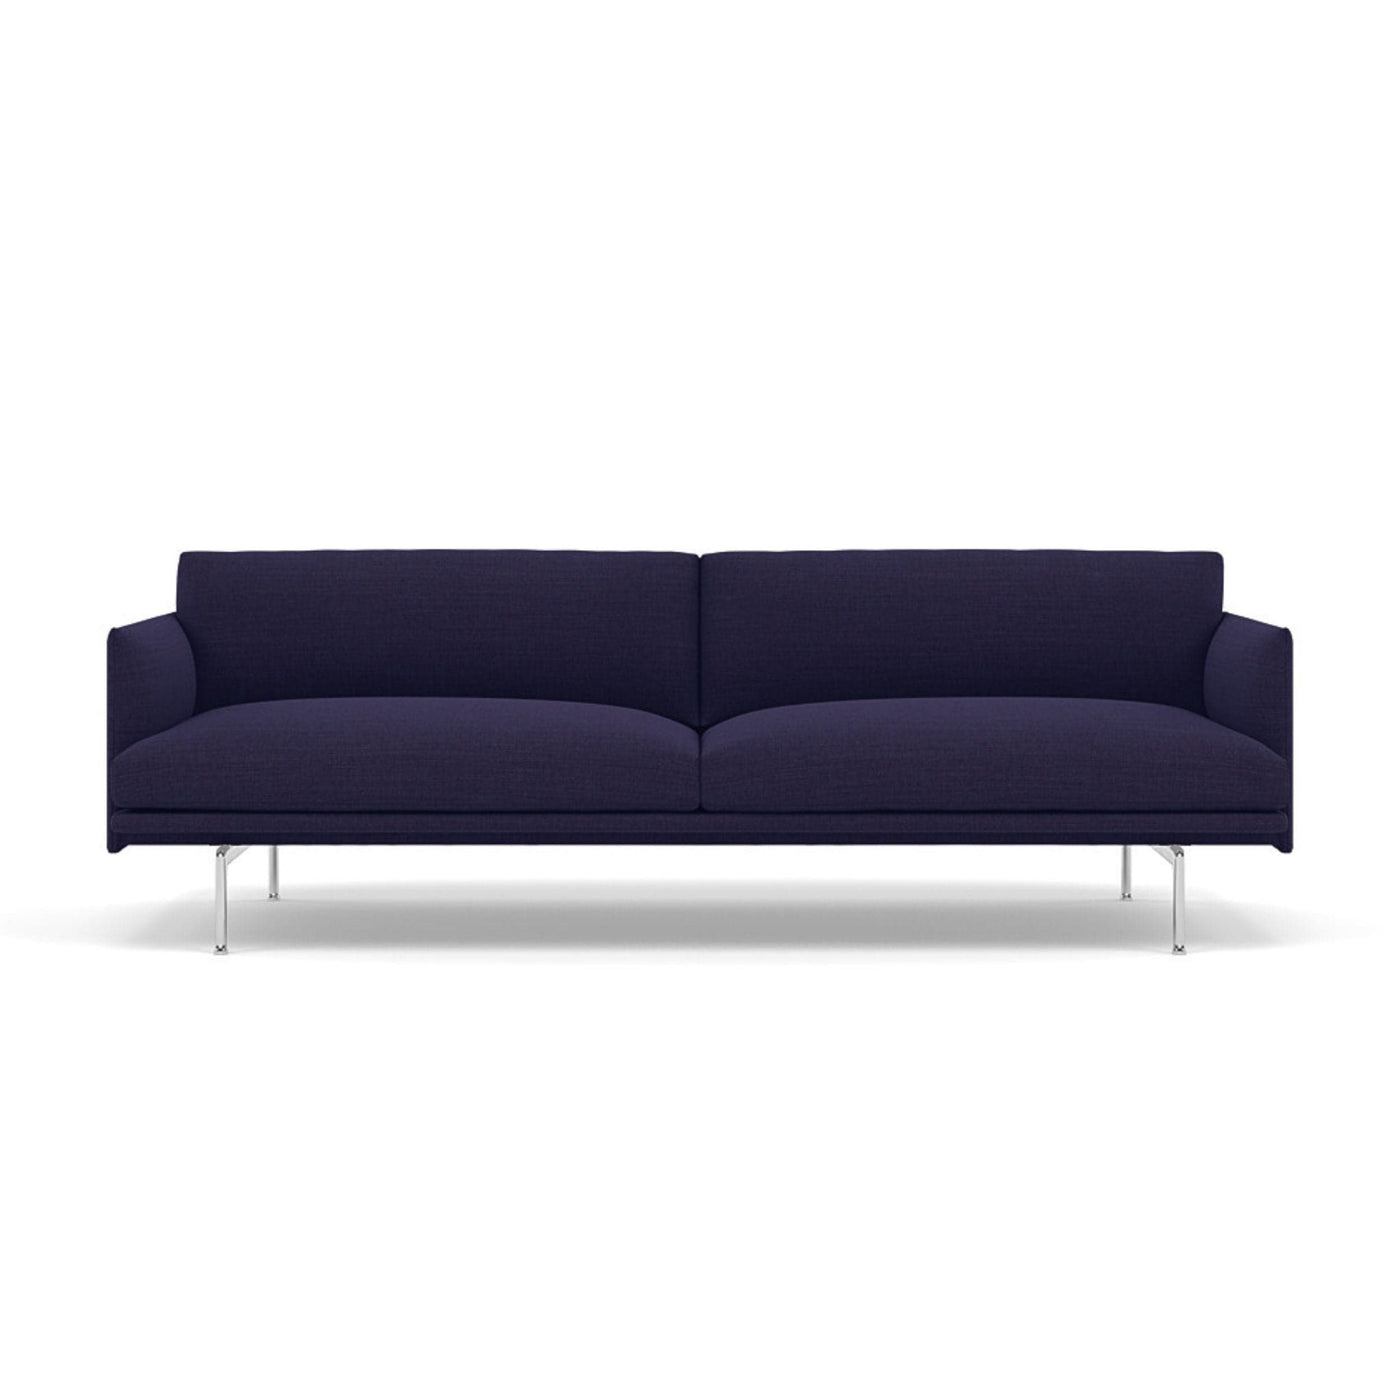 Muuto outline 3 seater sofa with polished aluminium legs. Made to order from someday designs. #colour_canvas-684-blue